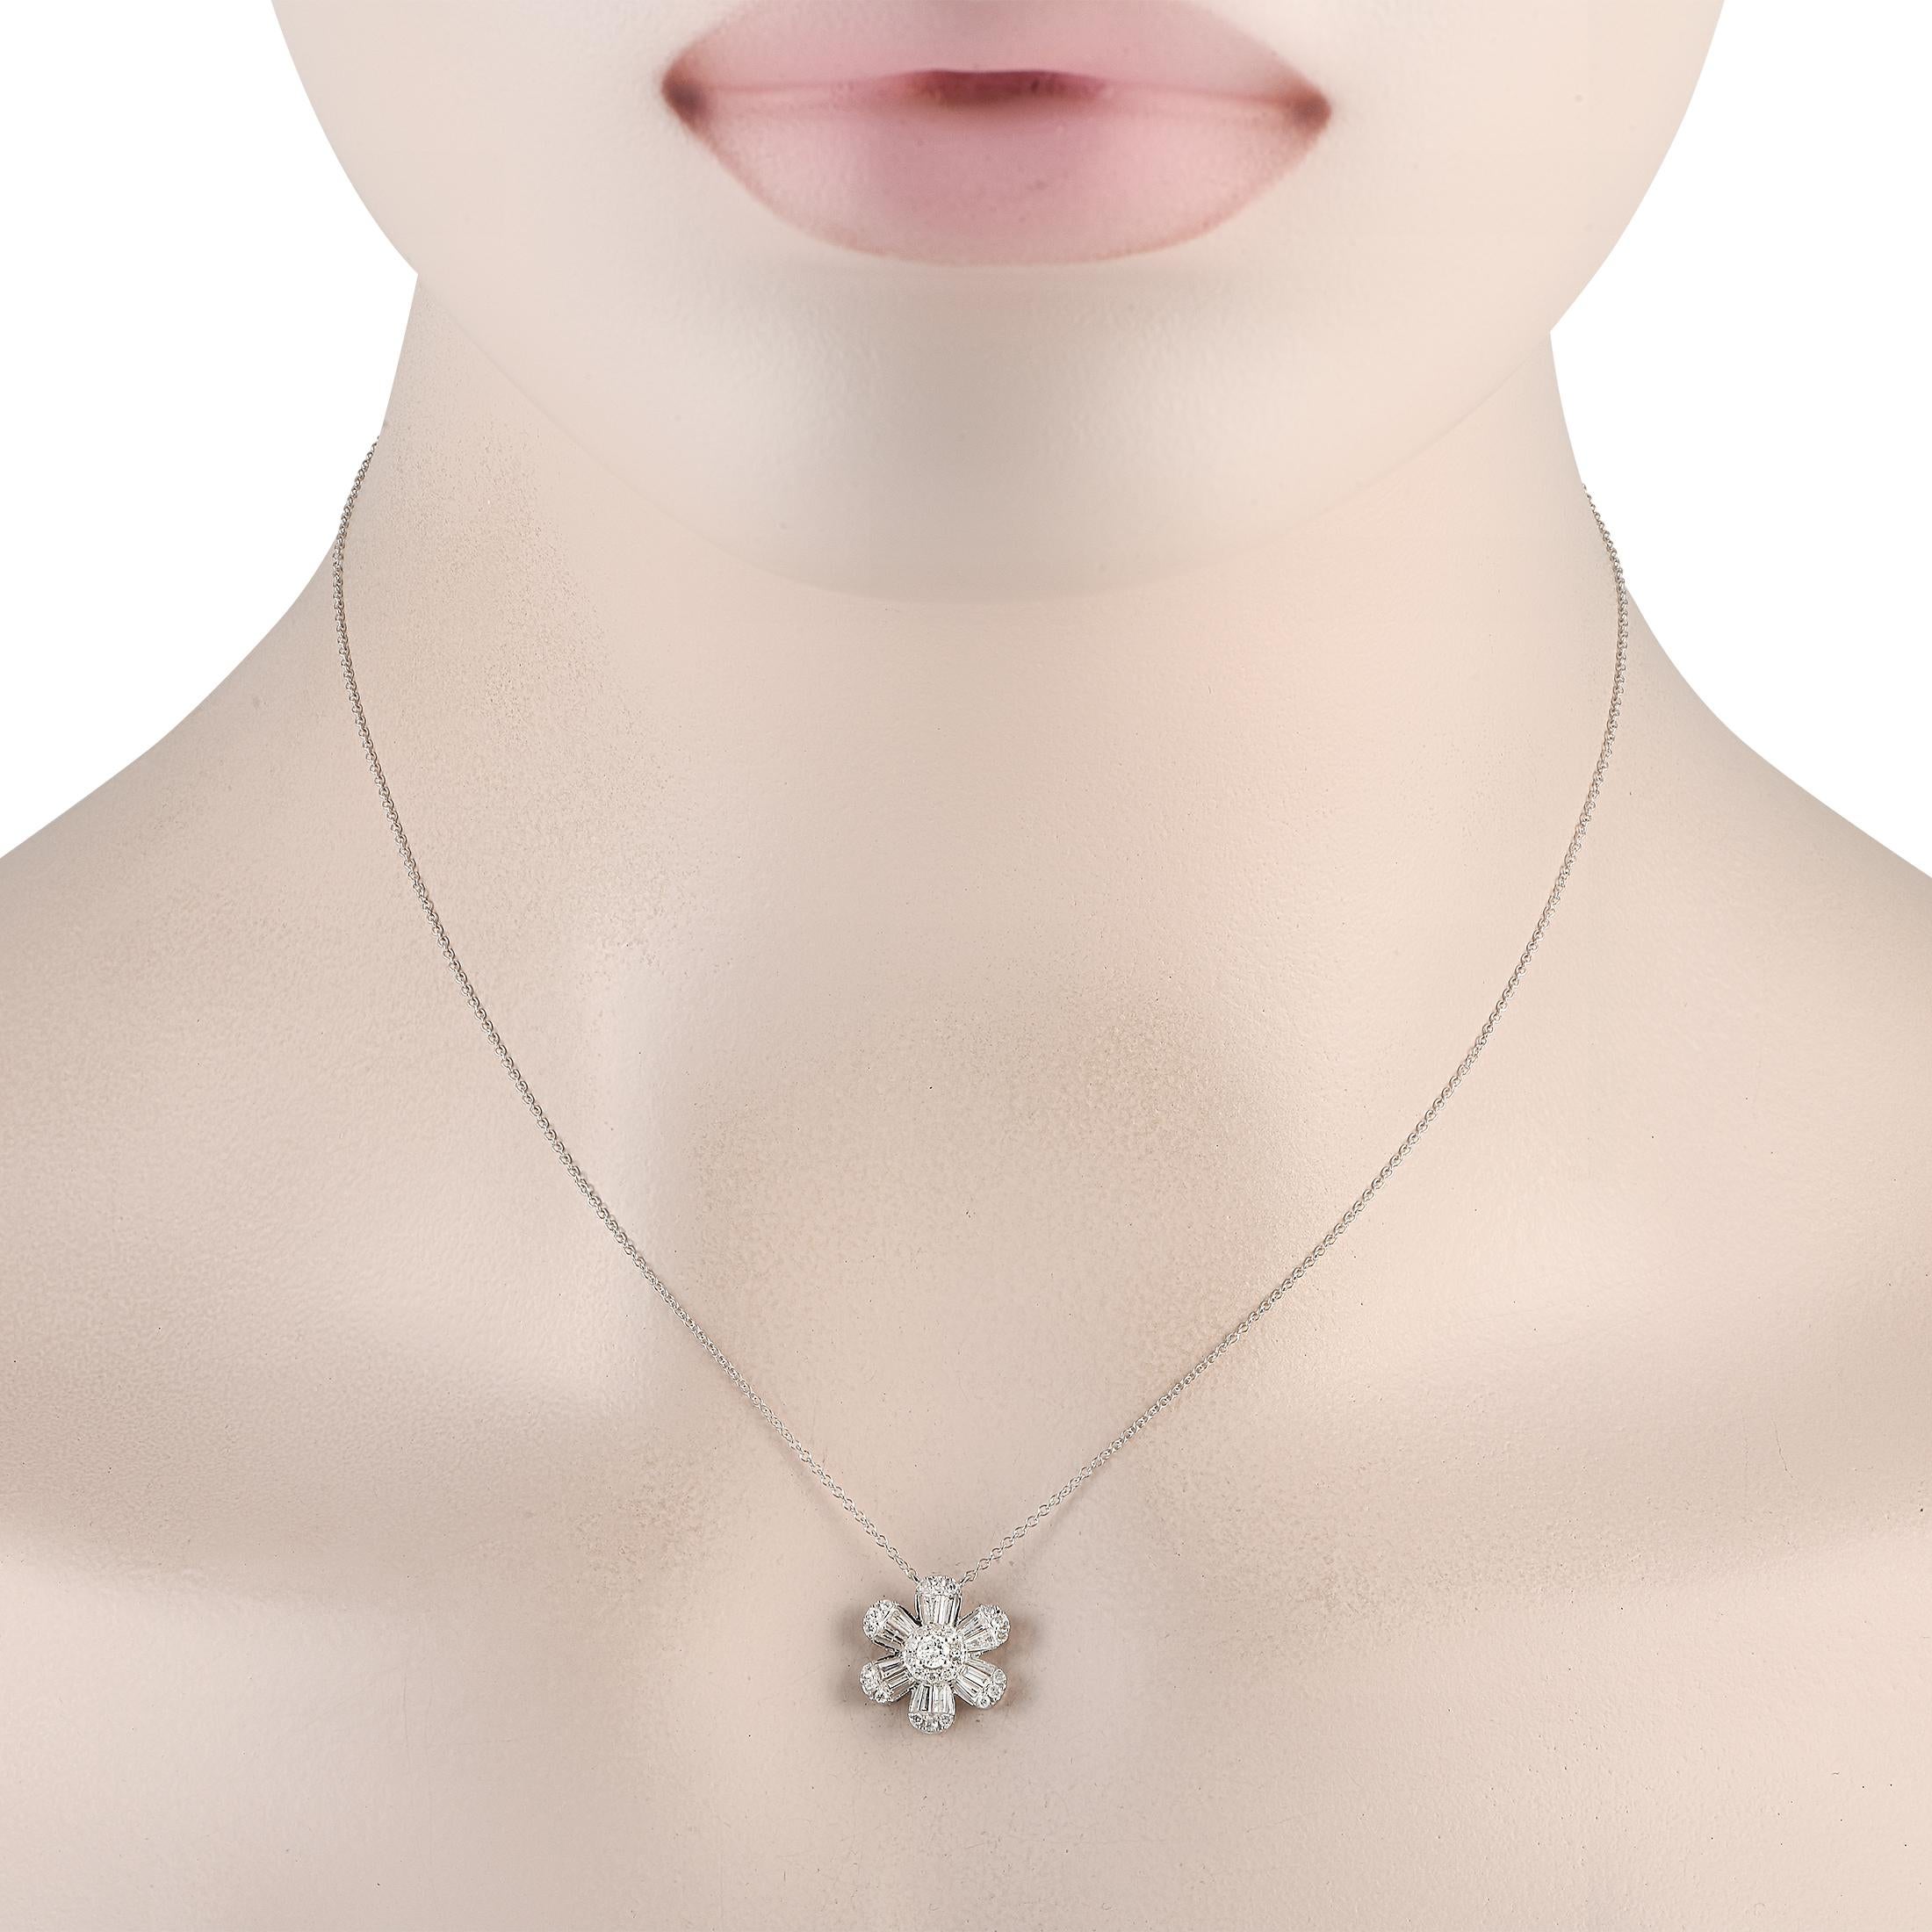 Add a touch of luxury to any ensemble by adding this impeccably crafted necklace. Suspended from a 16 chain, youll find an 14K white gold floral pendant measuring 0.50 round. Diamonds with a total weight of 0.65 carats provide it with the perfect